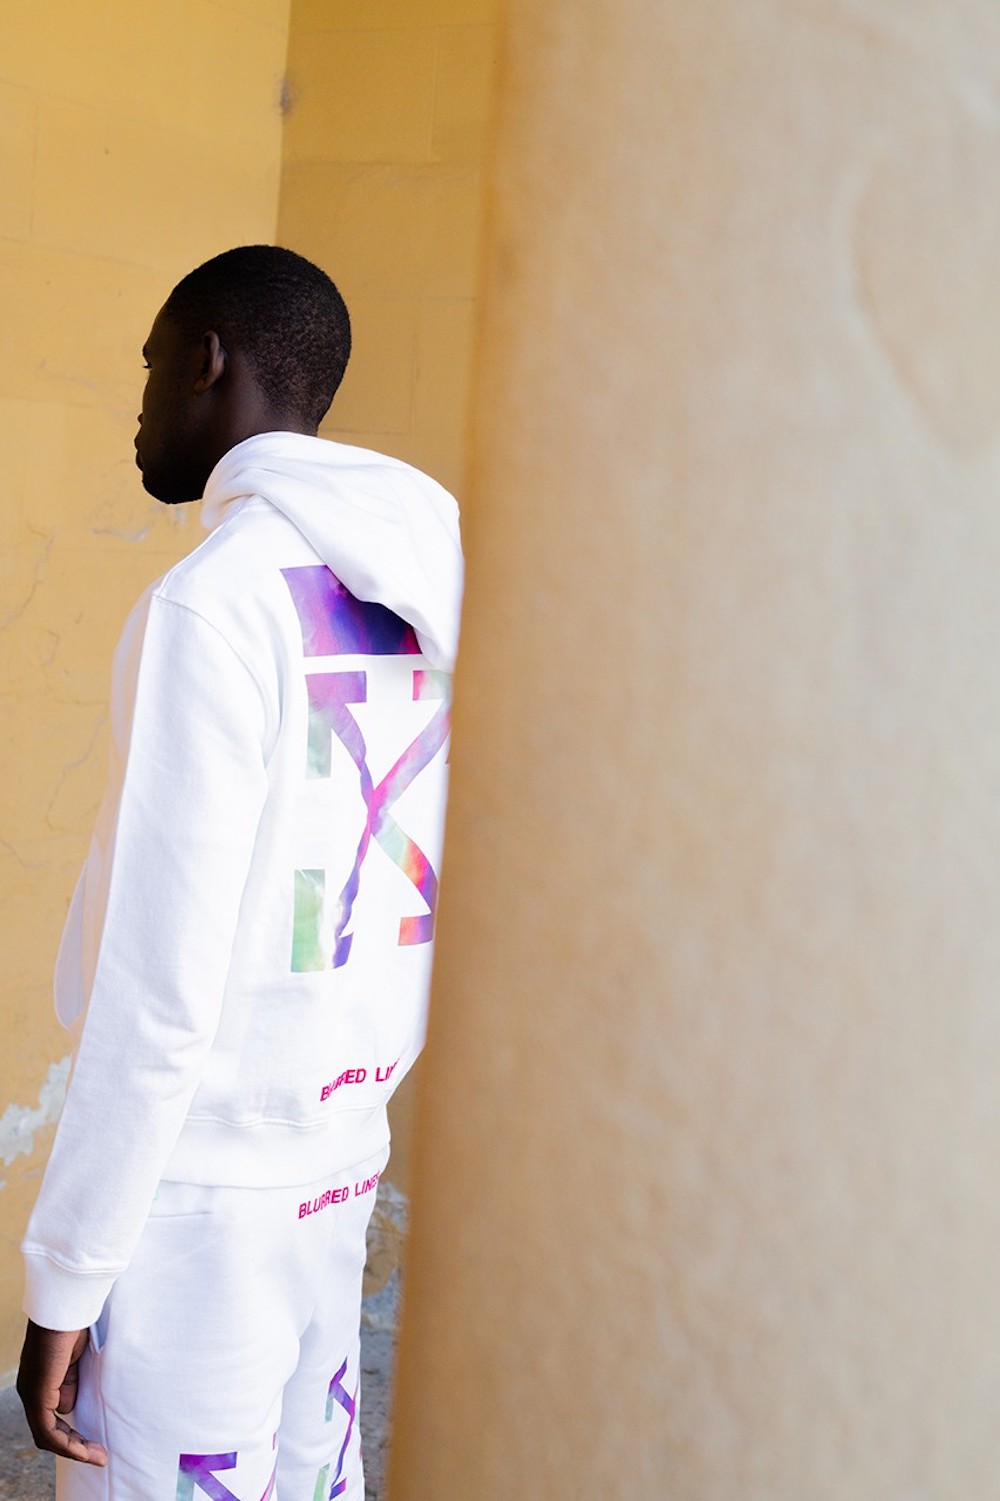 Off-White™ Drops Jakarta Exclusive “TRIPPY” Collection